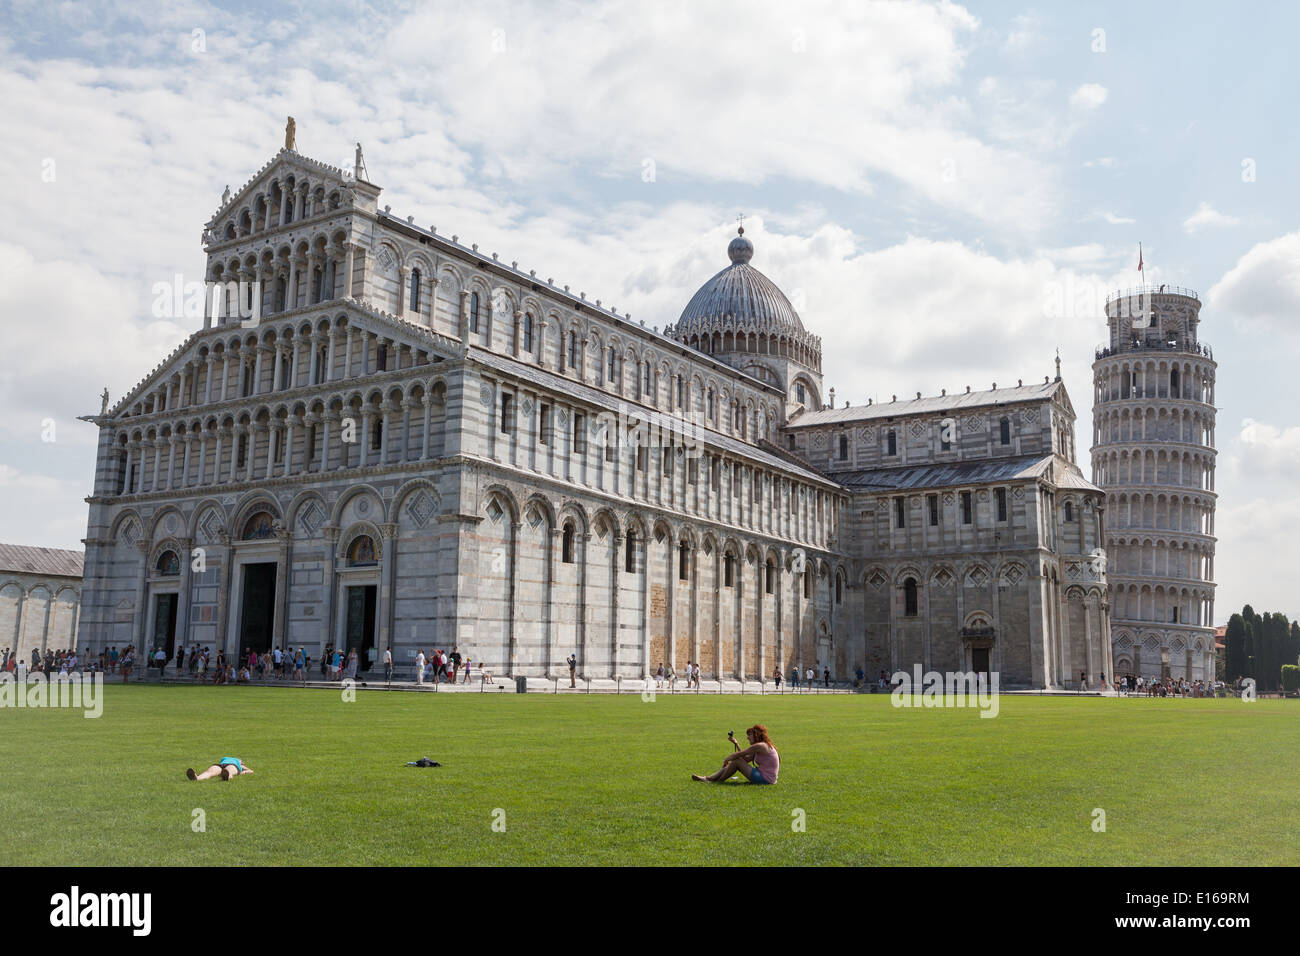 Pisa Cathedral and Leaning Tower of Pisa, on Piazza dei Miracoli in Pisa, Italy, with crowds of tourists strolling around. Stock Photo